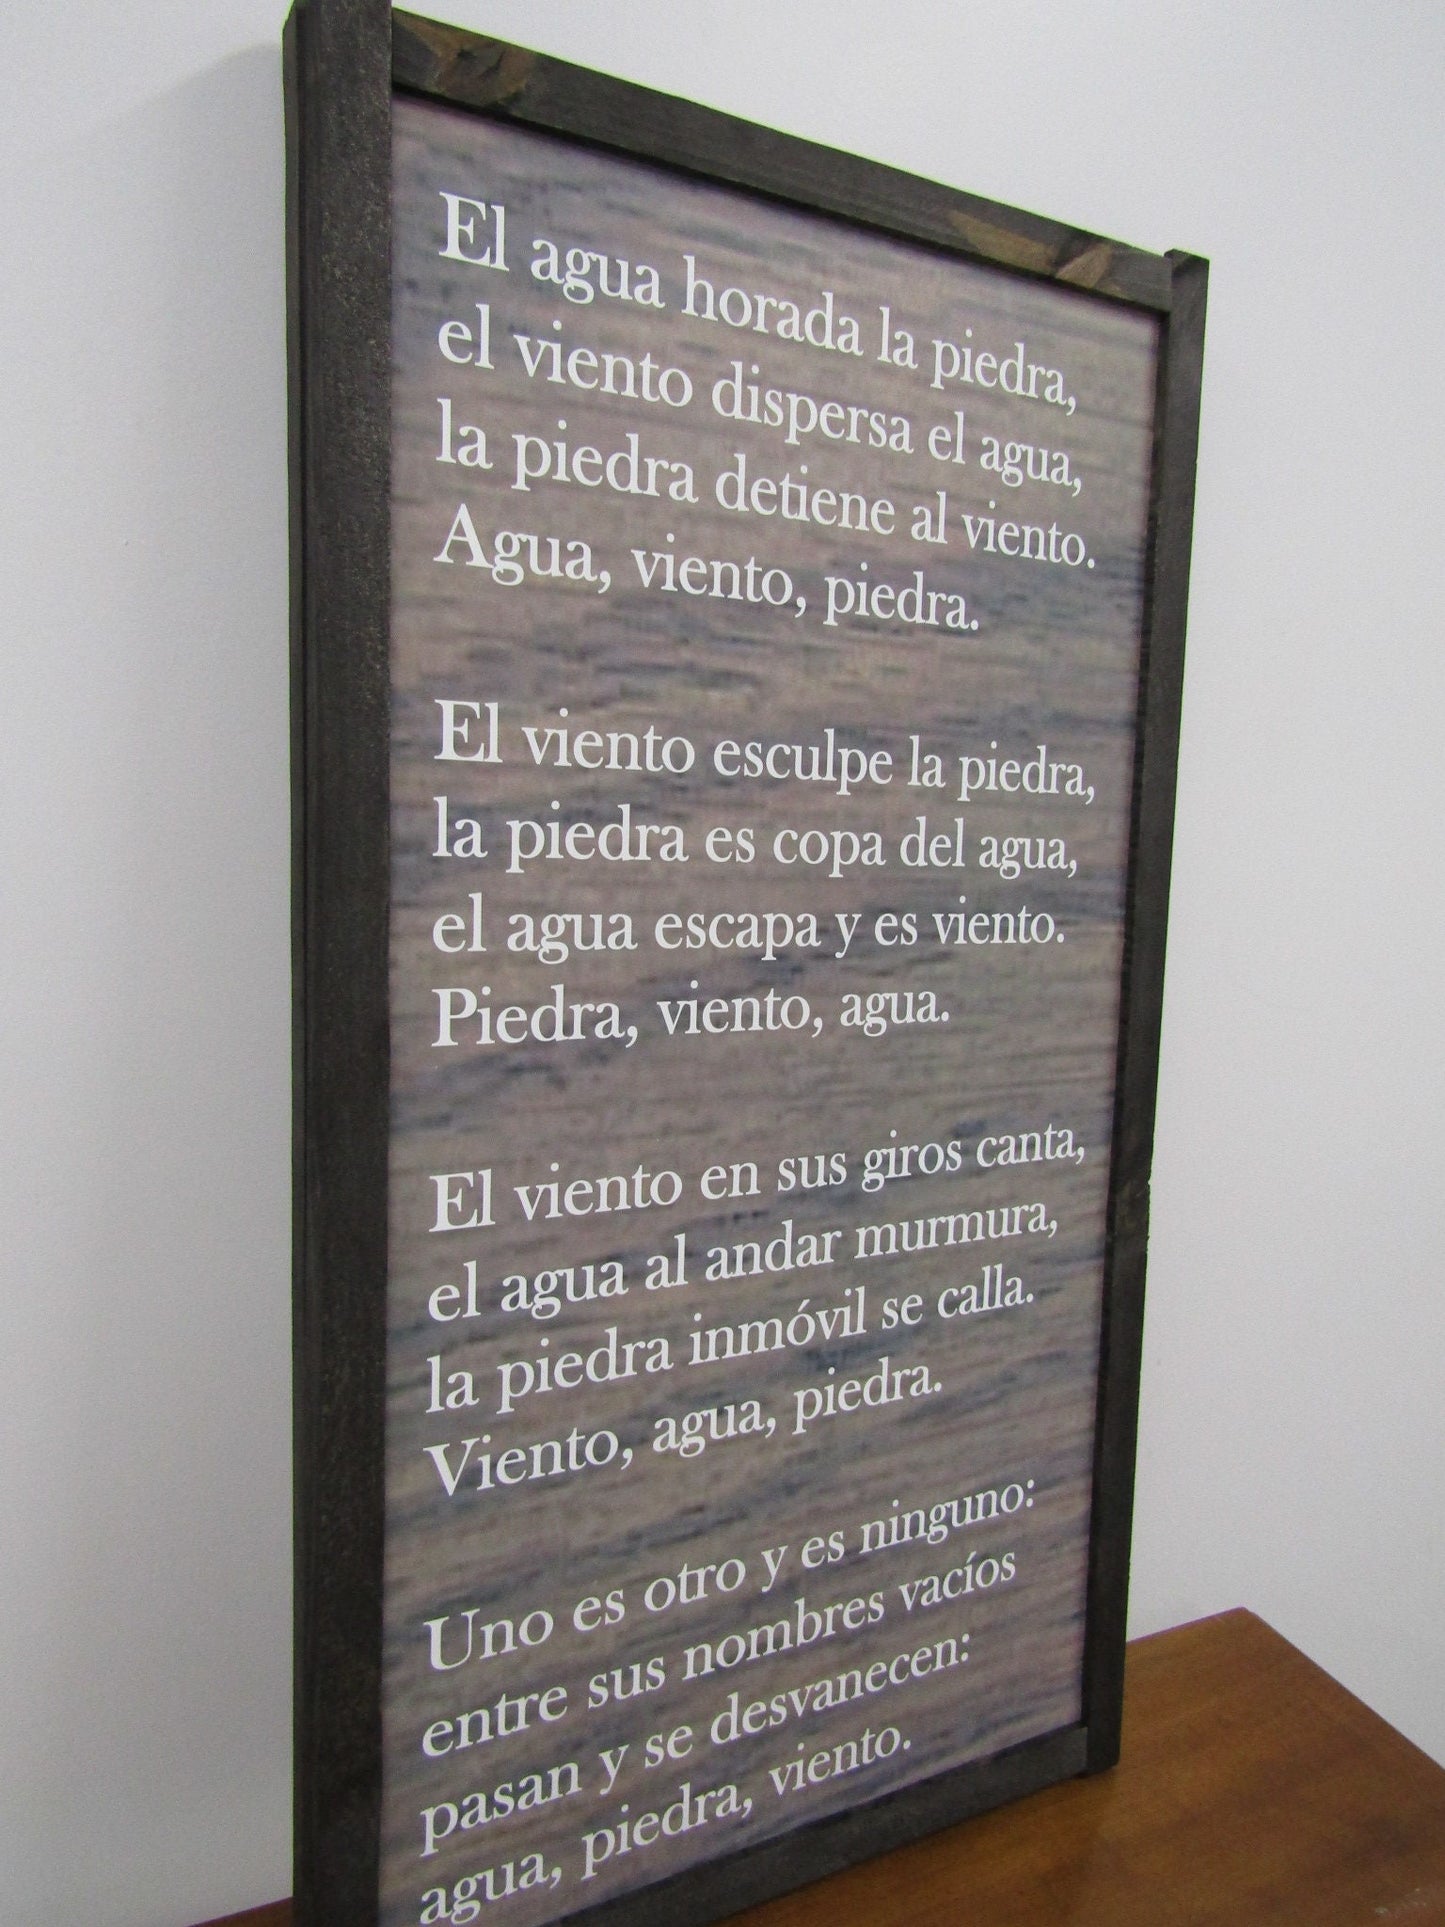 Custom Oversized Inspirational Spanish Quote Elements Earth Water Stone Framed Stained Personalized Peace Tranquility Gray Wash Uvprinted